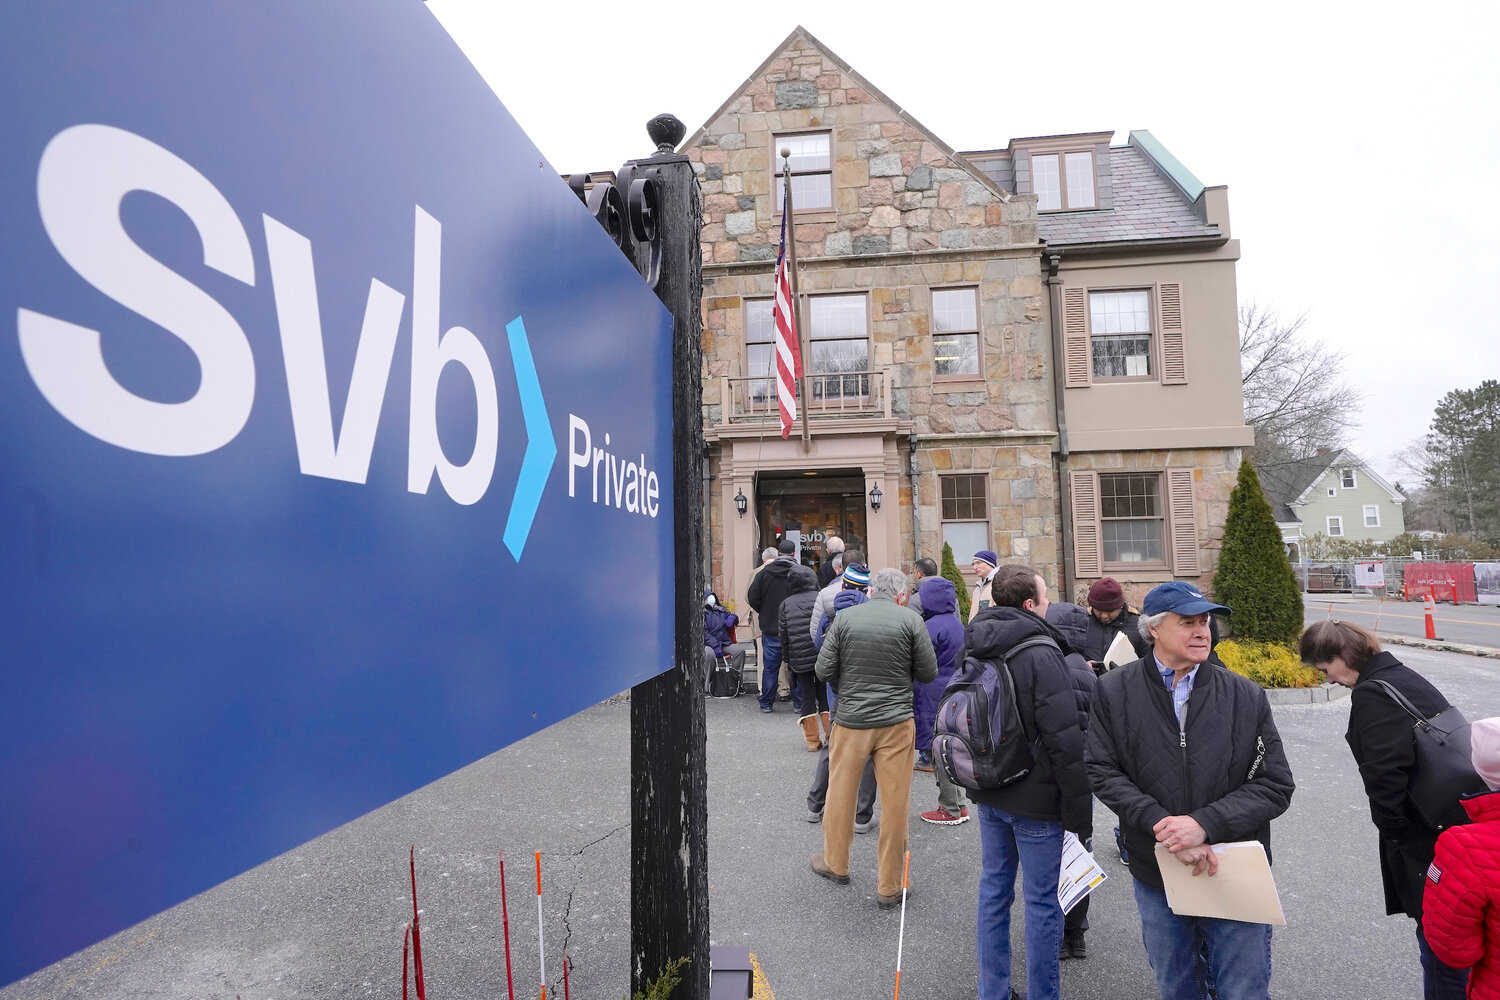 Customers and bystanders form a line outside a Silicon Valley Bank branch location, Monday, March 13, in Wellesley, Mass.